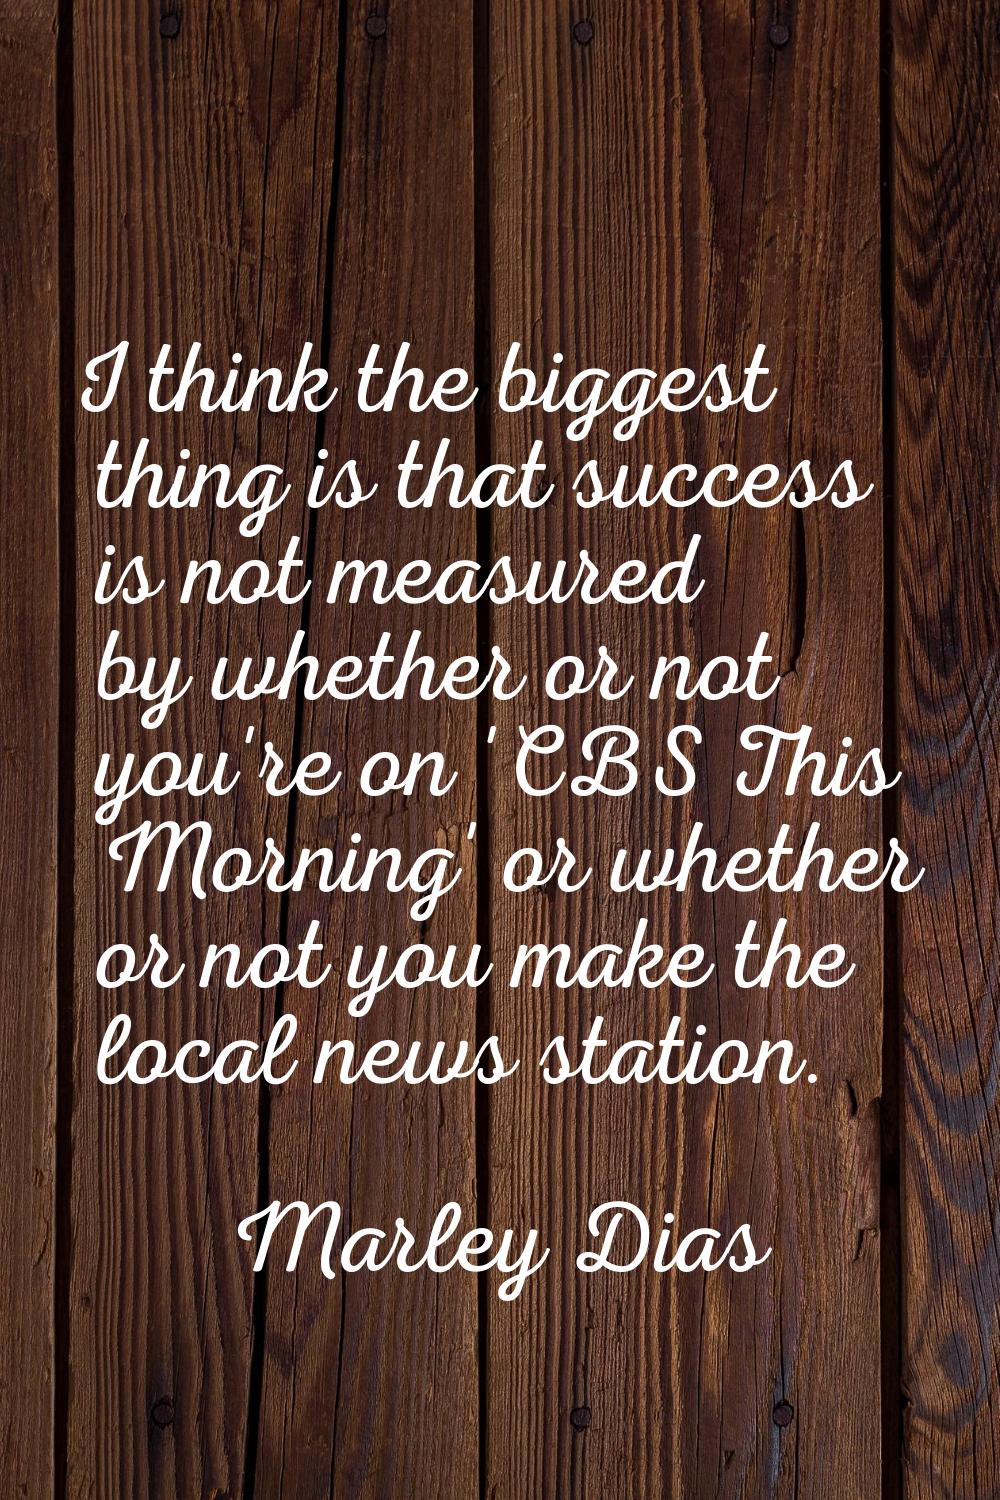 I think the biggest thing is that success is not measured by whether or not you're on 'CBS This Mor